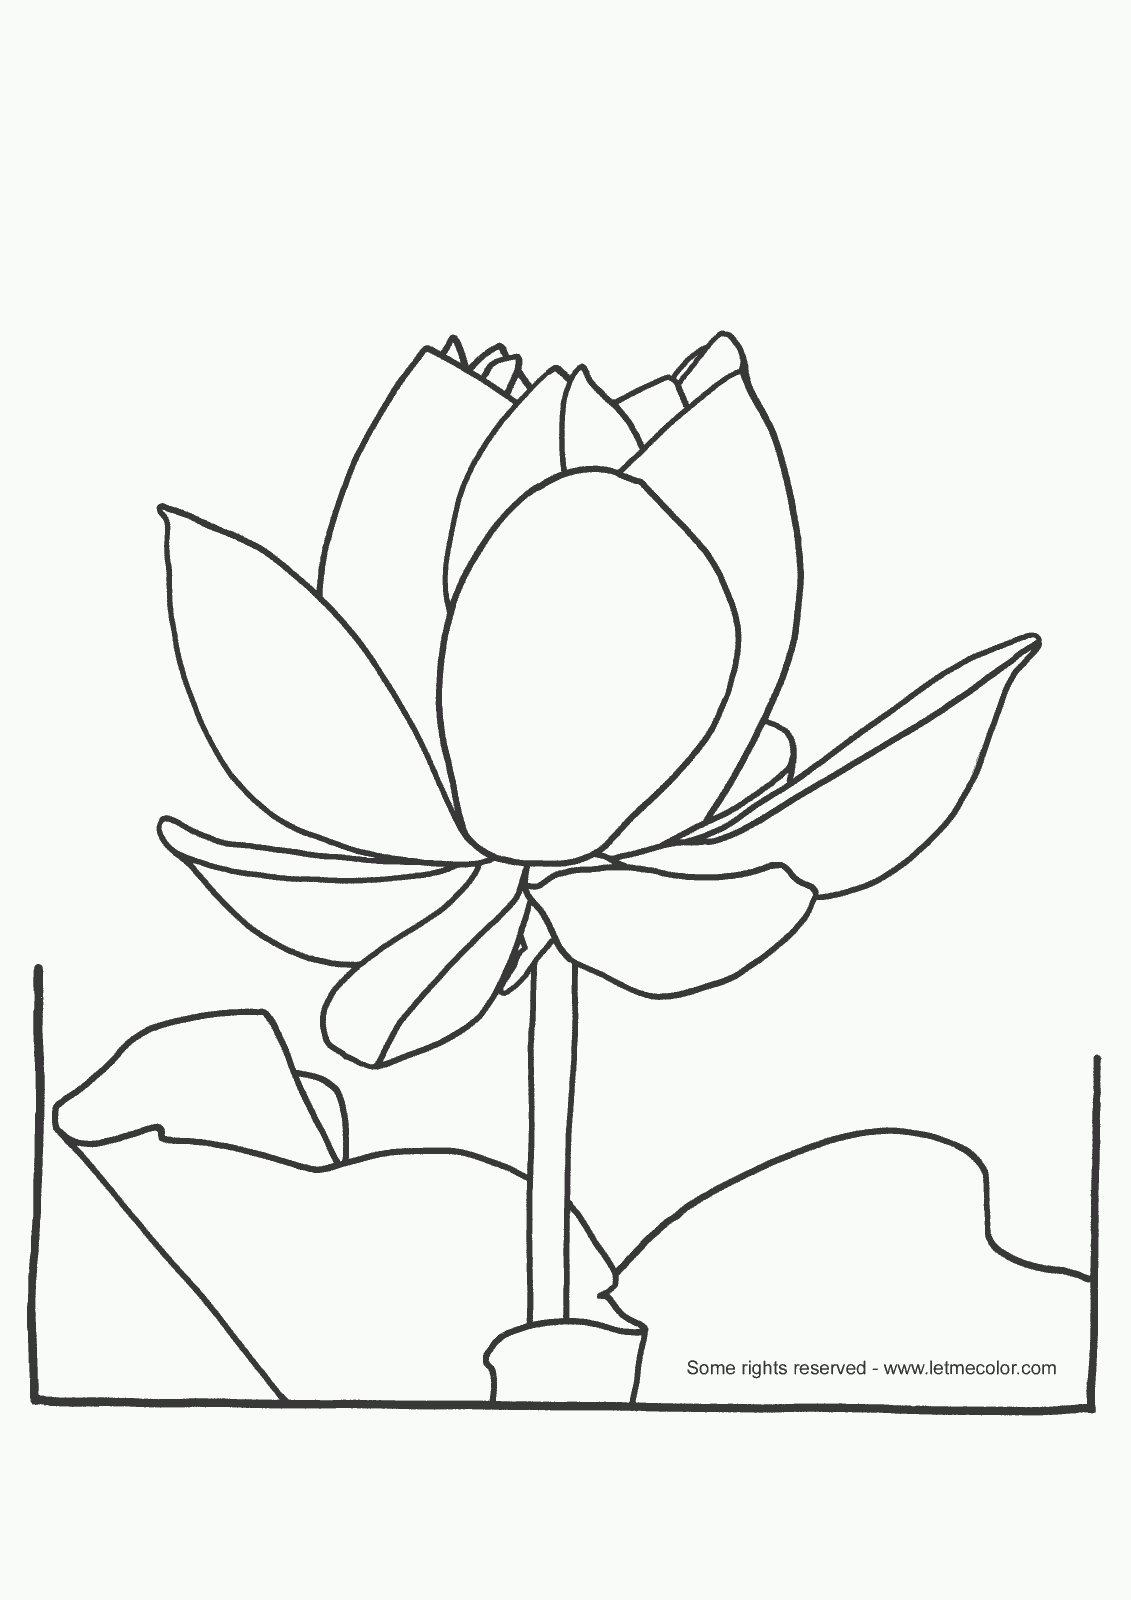 Lotus Flower Coloring Pages   Coloring Home